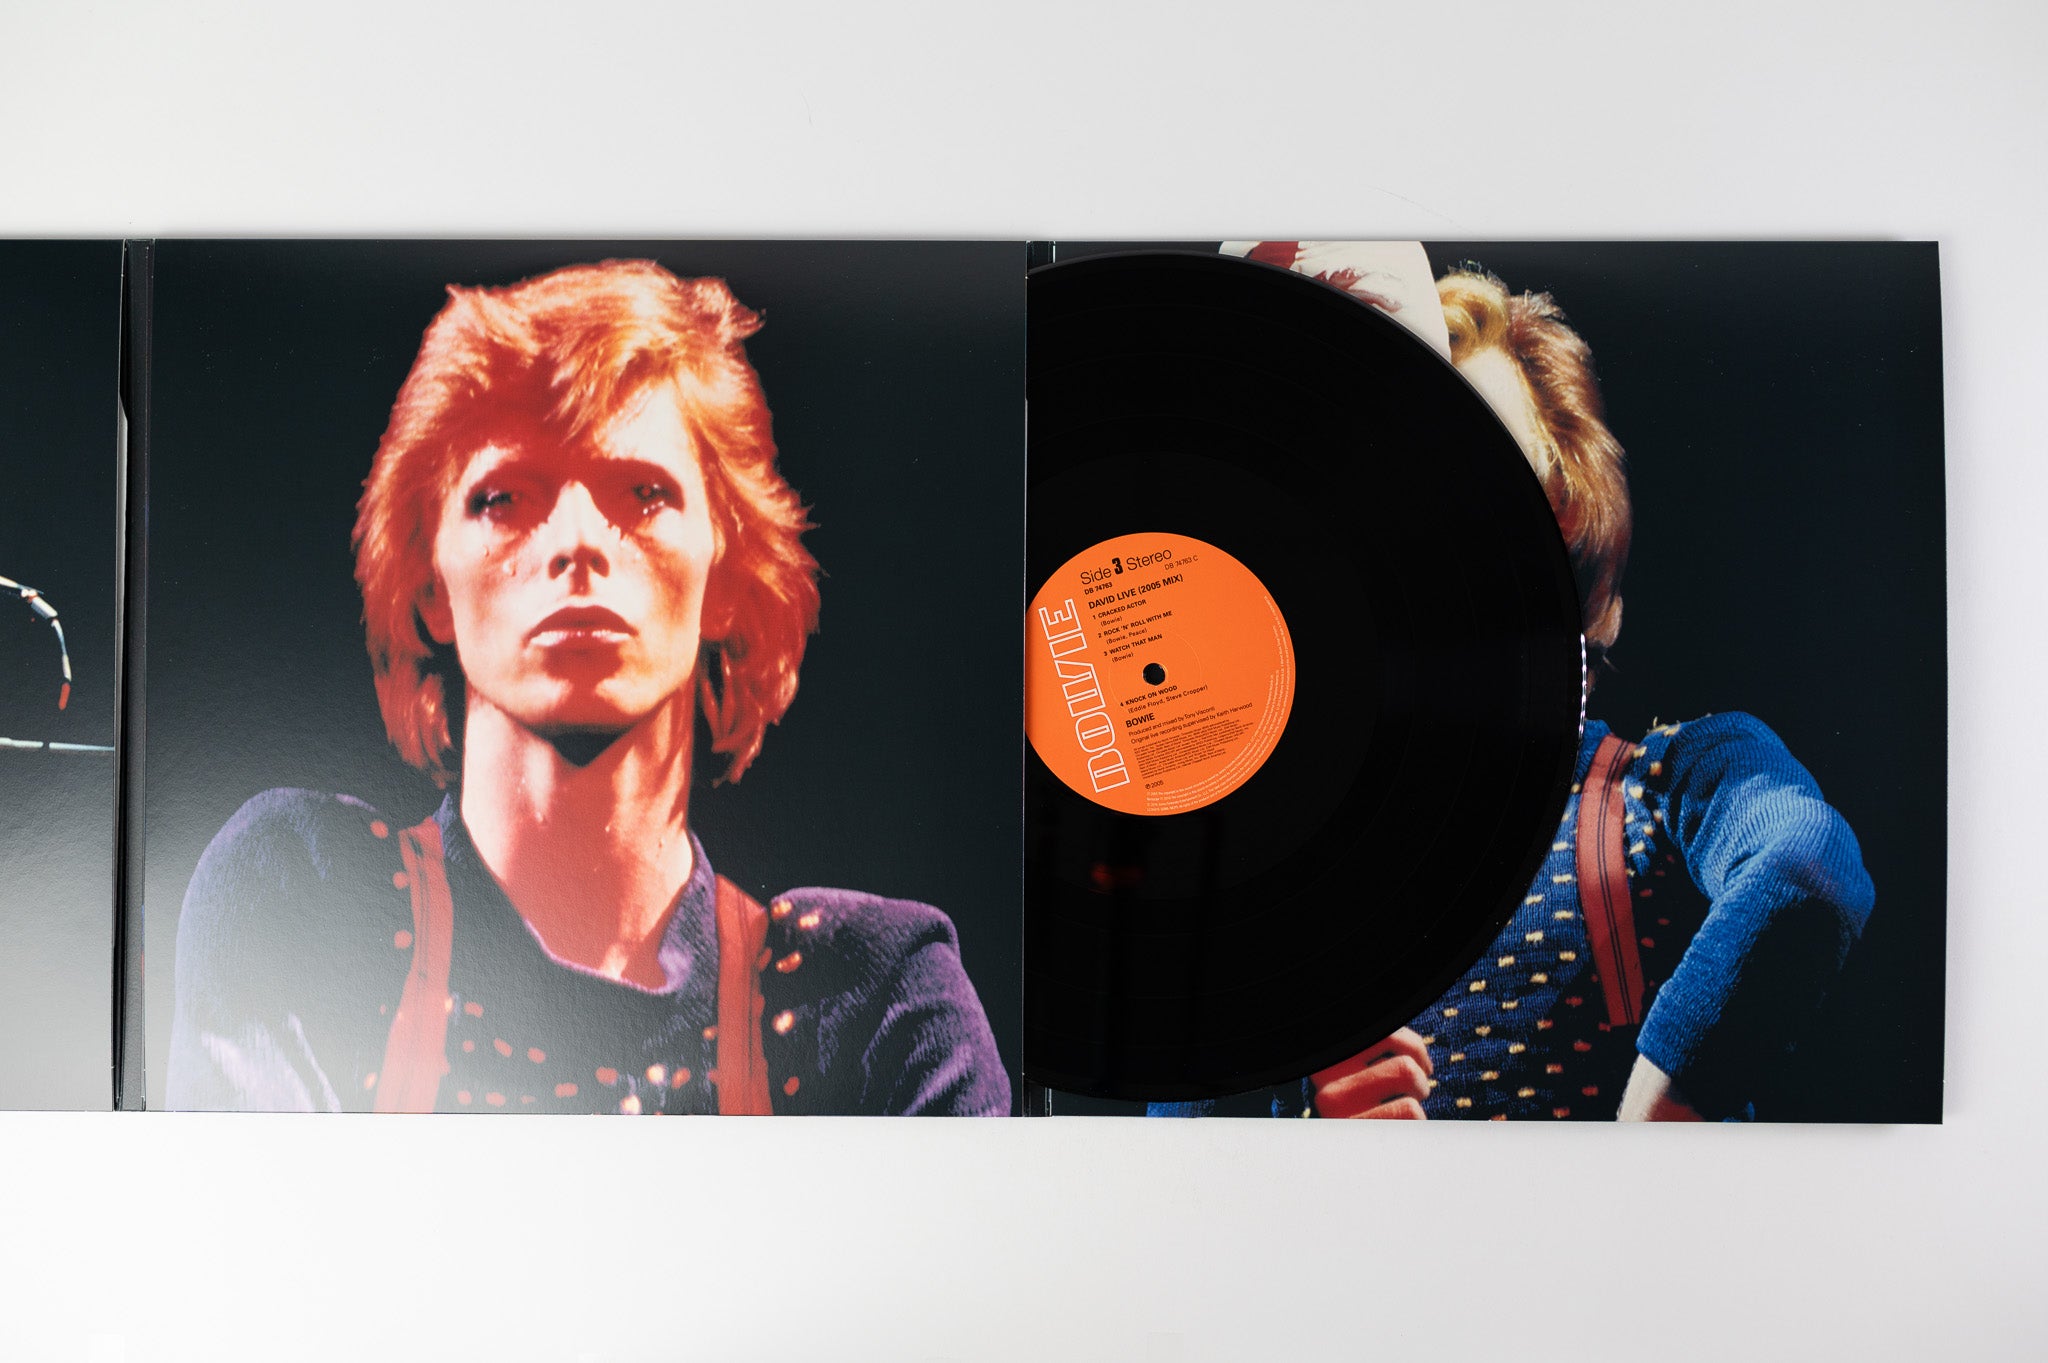 David Bowie - Who Can I Be Now? [ 1974–1976 ] on Parlophone Remastered Reissue Box Set